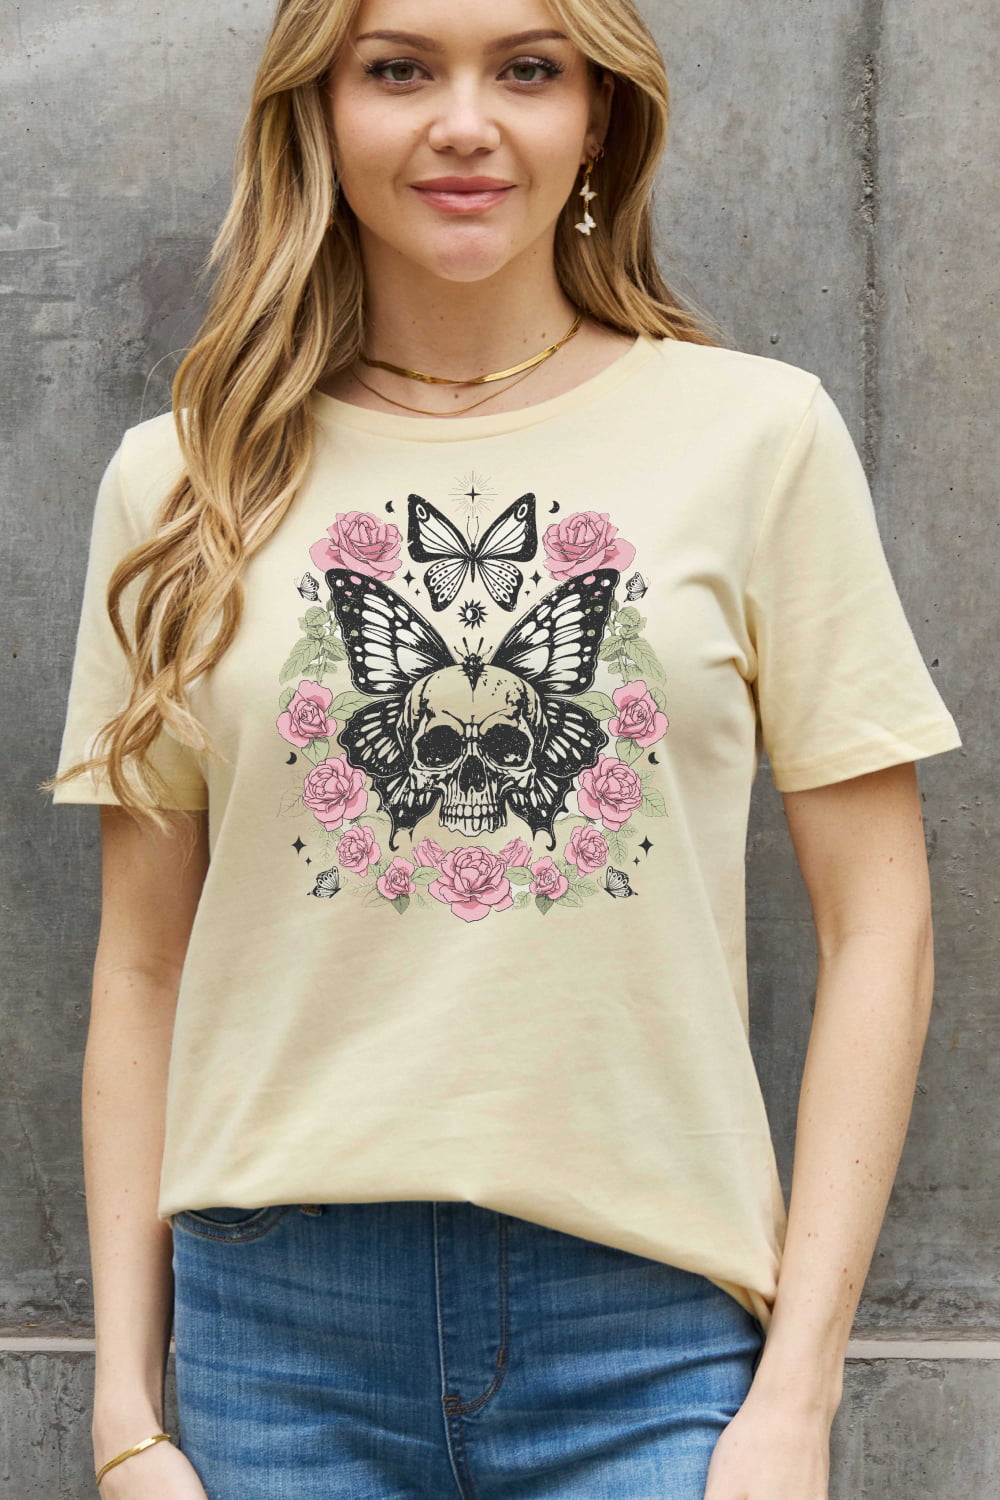 Simply Love Full Size Skull & Butterfly Graphic Cotton Tee